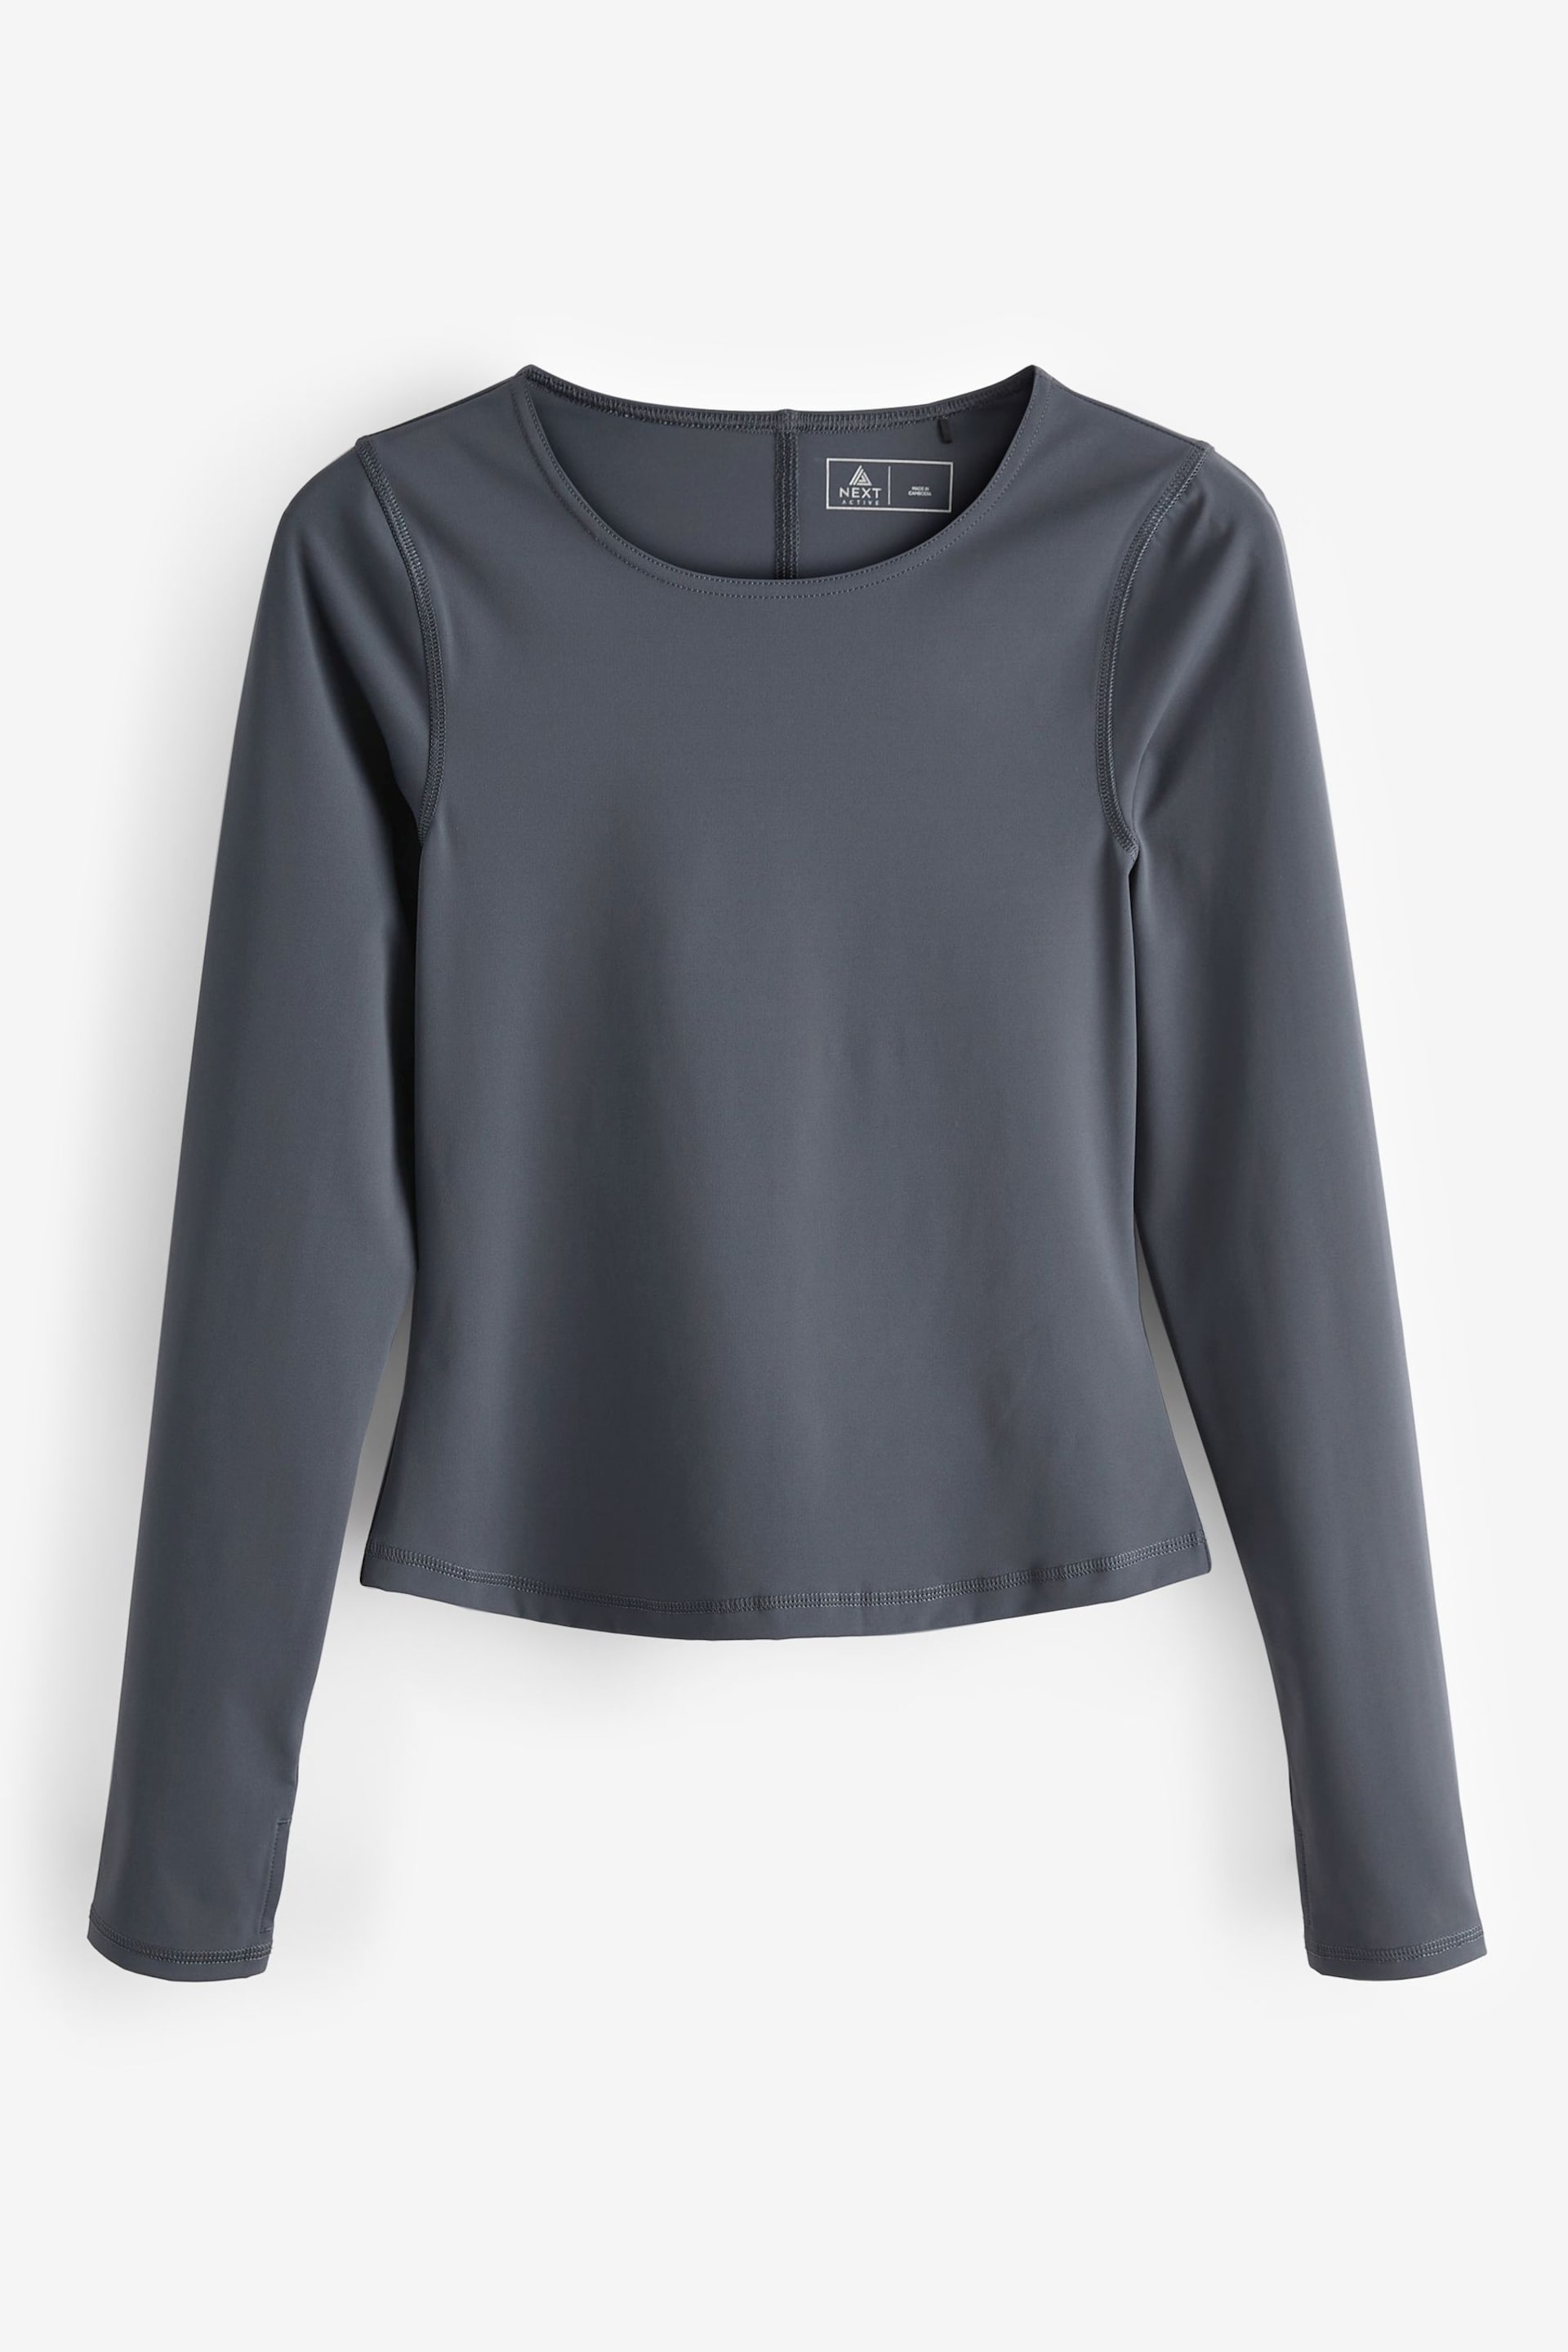 Slate Grey Supersoft Everyday Sports Long Sleeve Top - Image 6 of 7